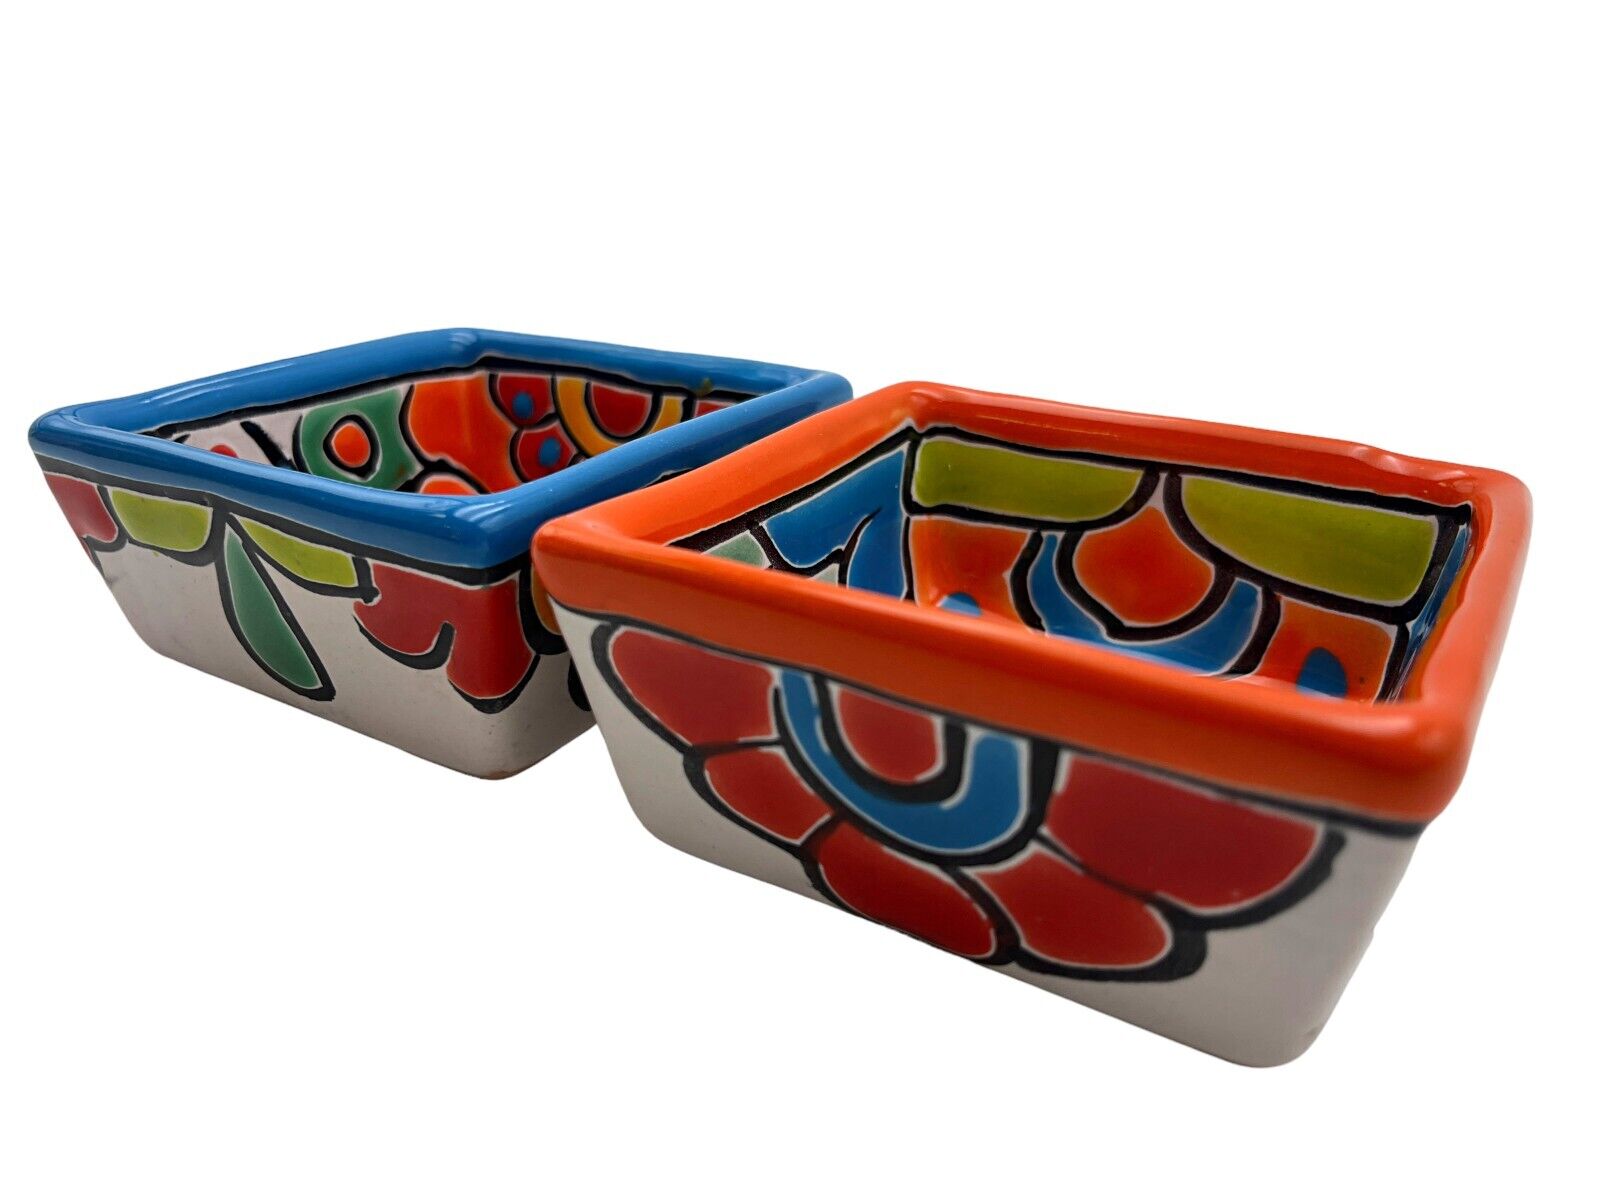 Talavera Candy Dish 2 Square Handmade Hand Painted Kitchen Mexican Pottery 3.5”